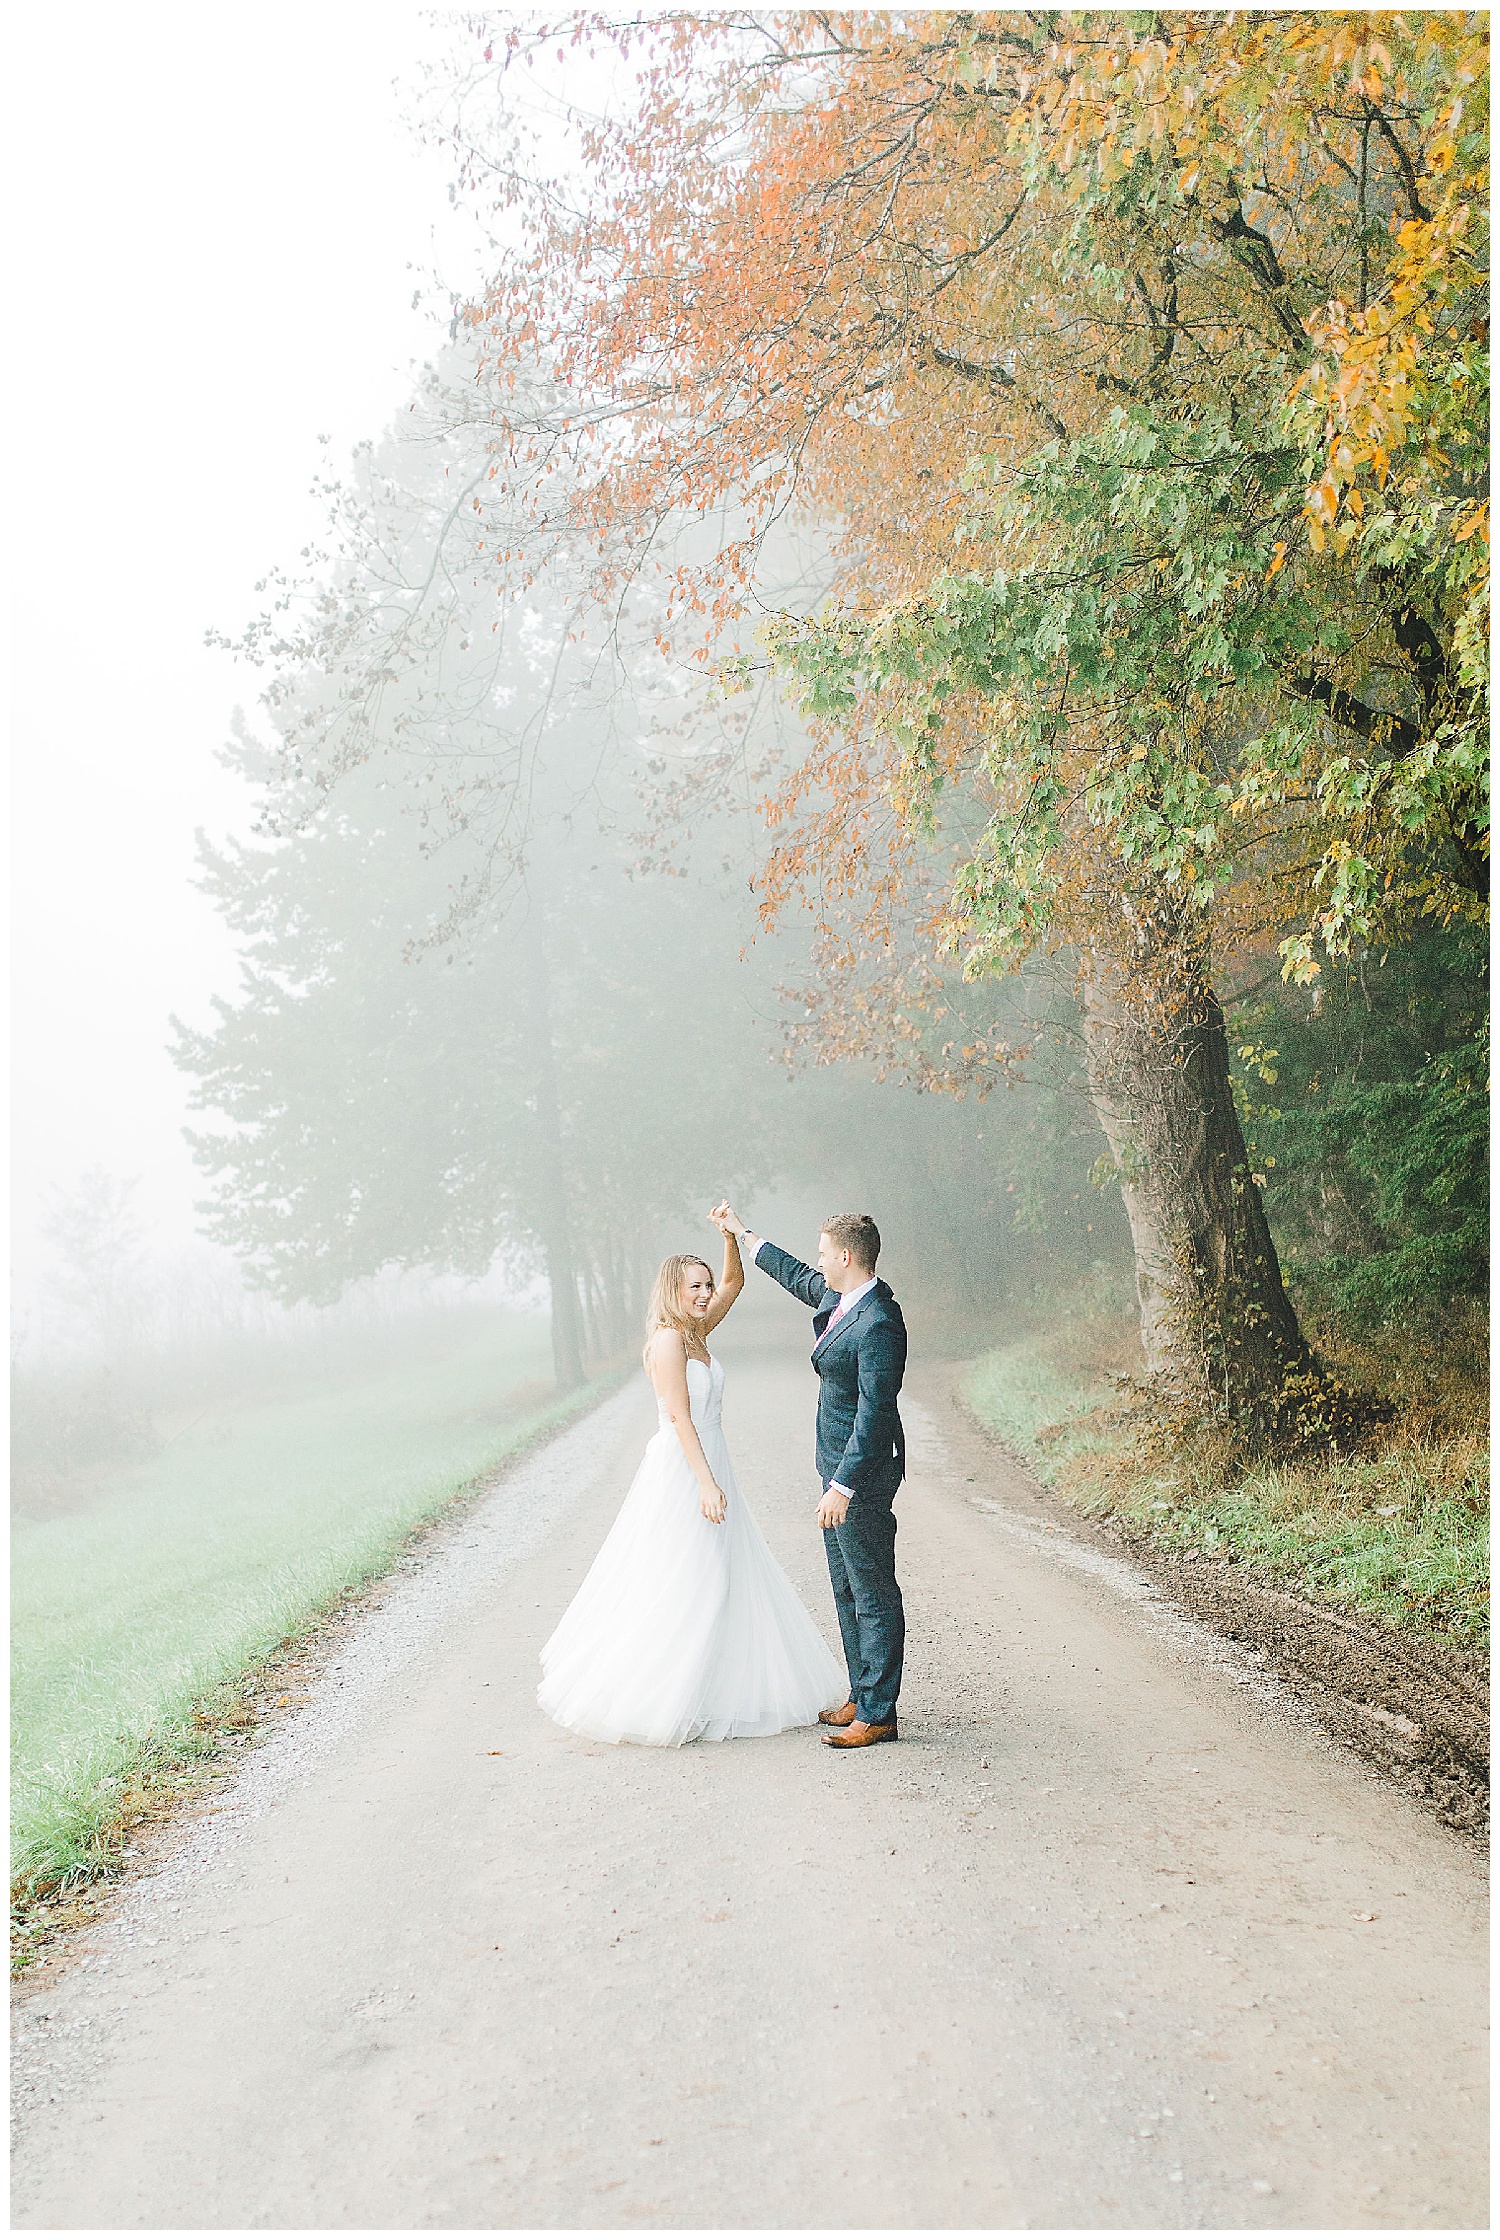 Emma Rose Company recently got to travel all the way to Nashville to photograph the most beautiful post-wedding bride and groom portraits in the Great Smoky Mountains with a gorgeous couple! Nashville wedding inspiration at it's finest._0019.jpg